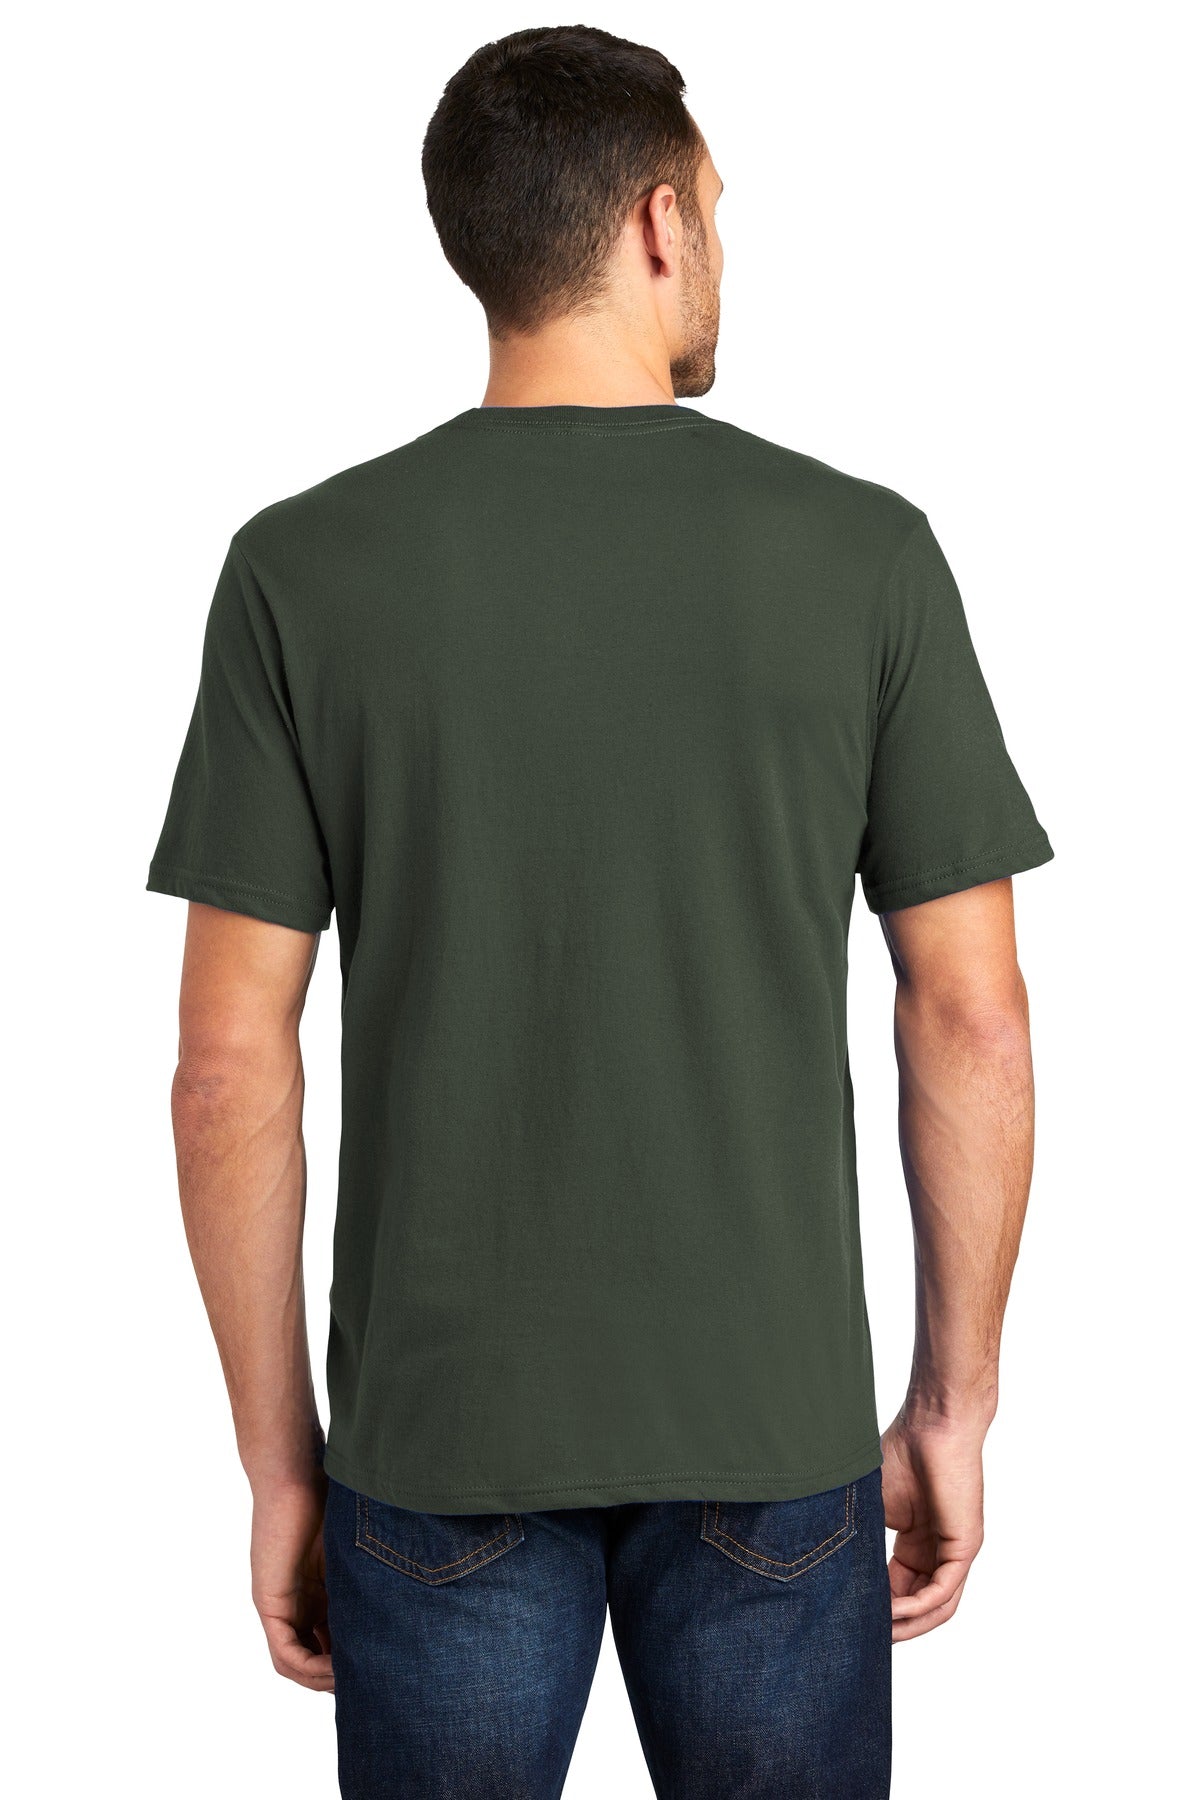 District® Very Important Tee®. DT6000 [Olive] - DFW Impression